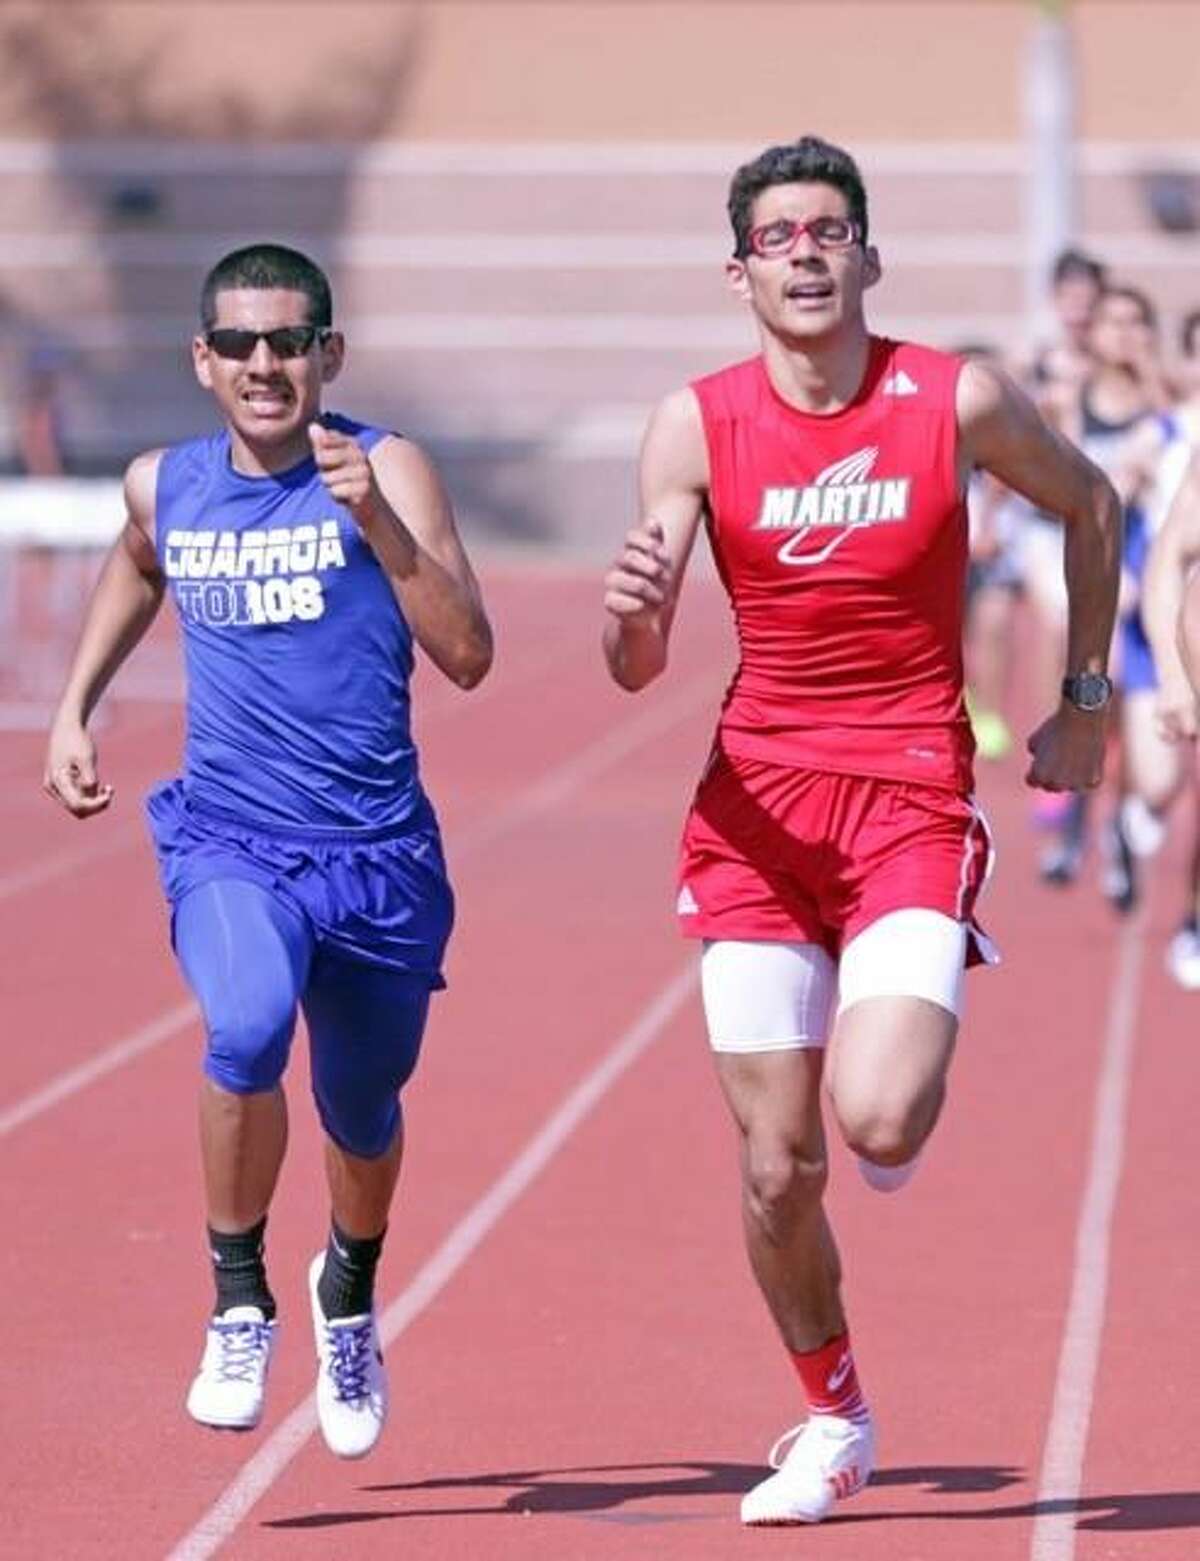 Cigarroa's Leeroy Raya and Martin's Miguel Escamilla compete in the 800-meter run.